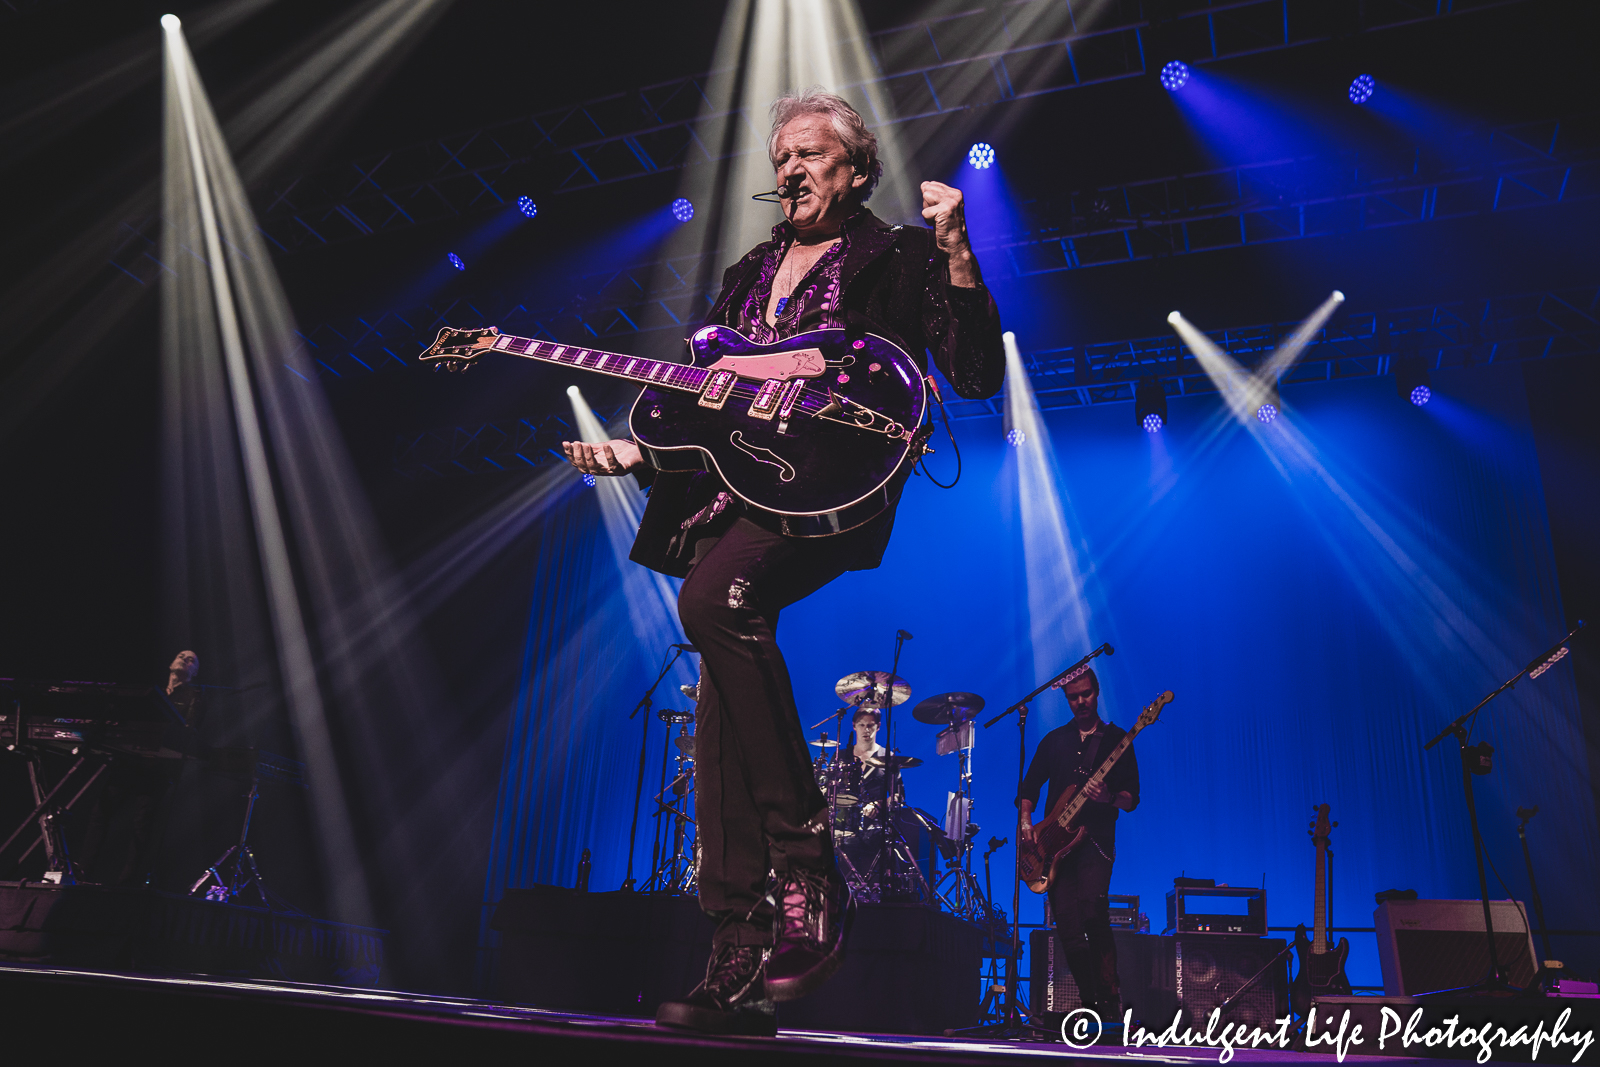 Singer and guitarist Graham Russell of soft rock duo Air Supply singing "Sweet Dreams" live in concert at Ameristar Casino's Star Pavilion in Kansas City, MO on May 5, 2023.